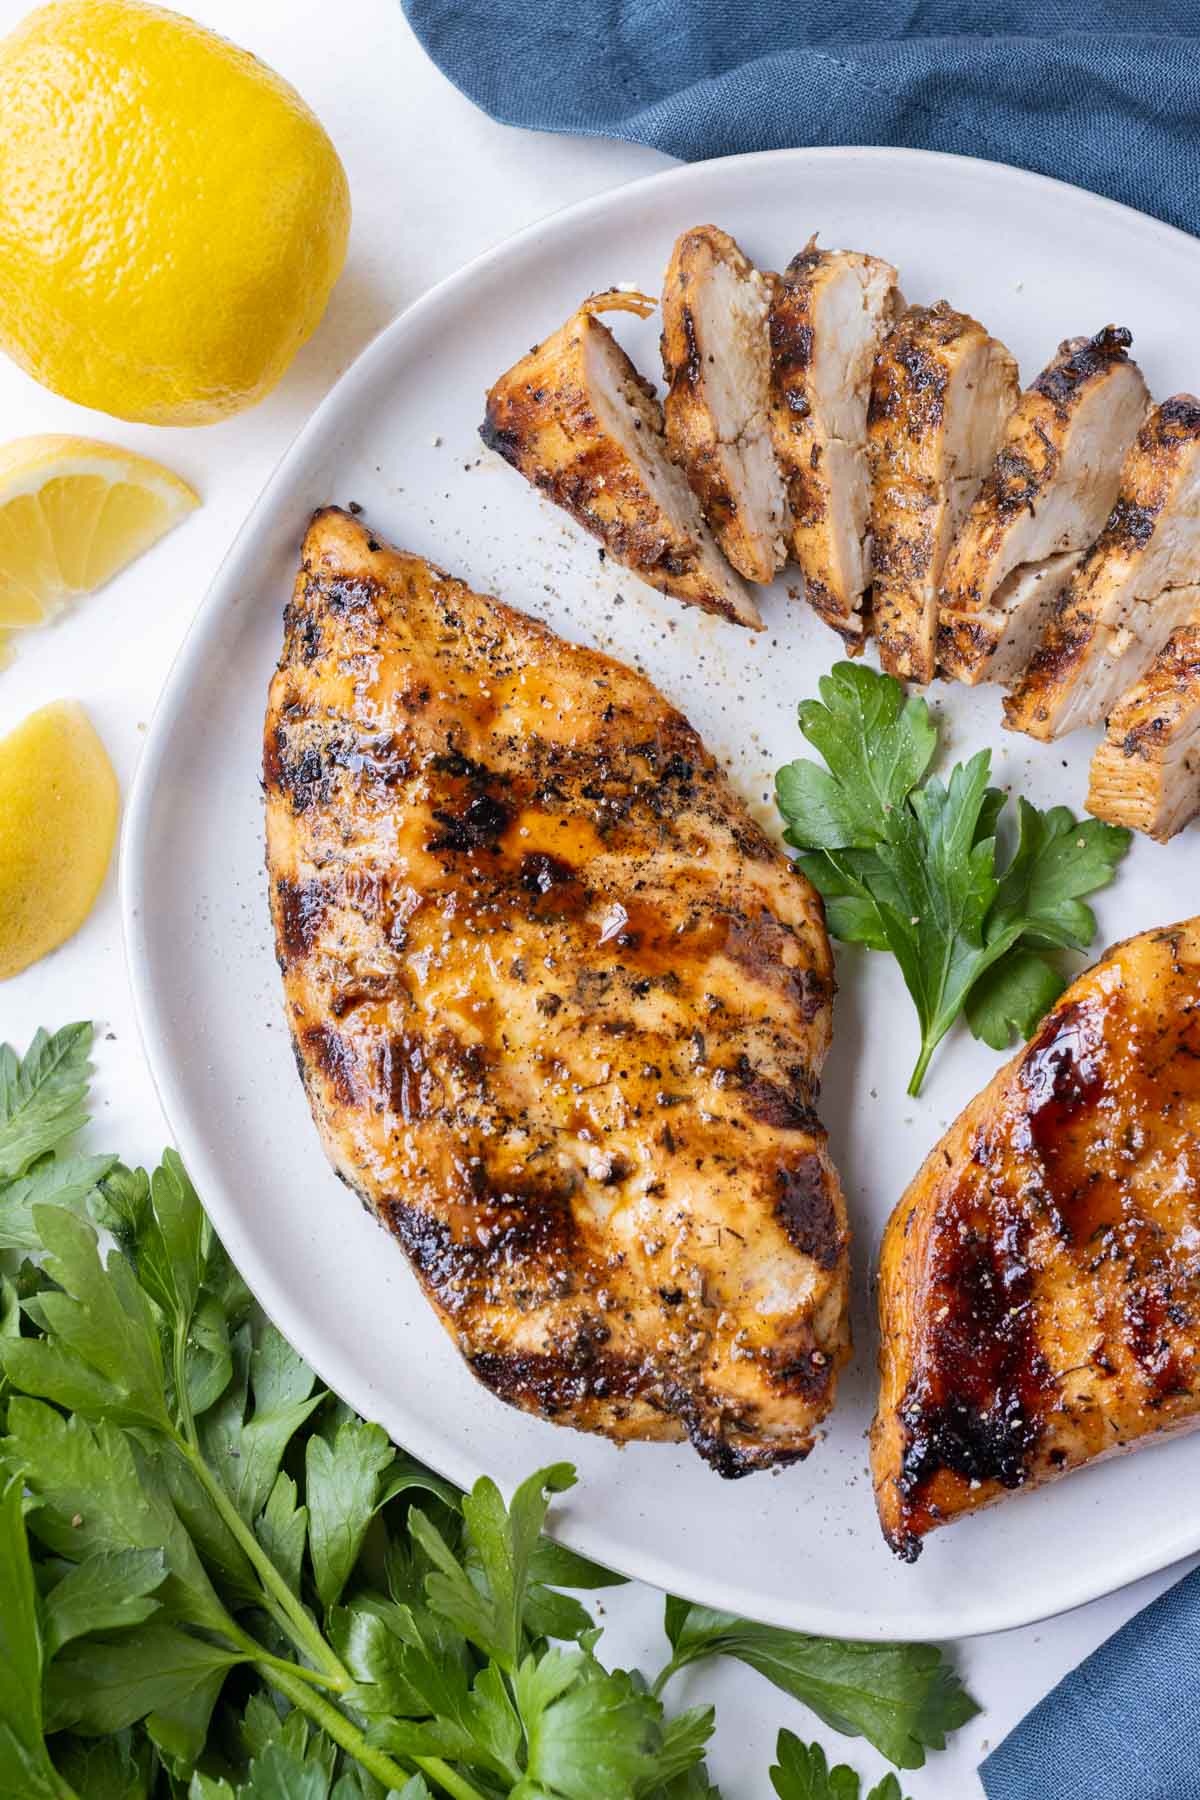 Chicken breast is marinated in a balsamic glaze and grilled.